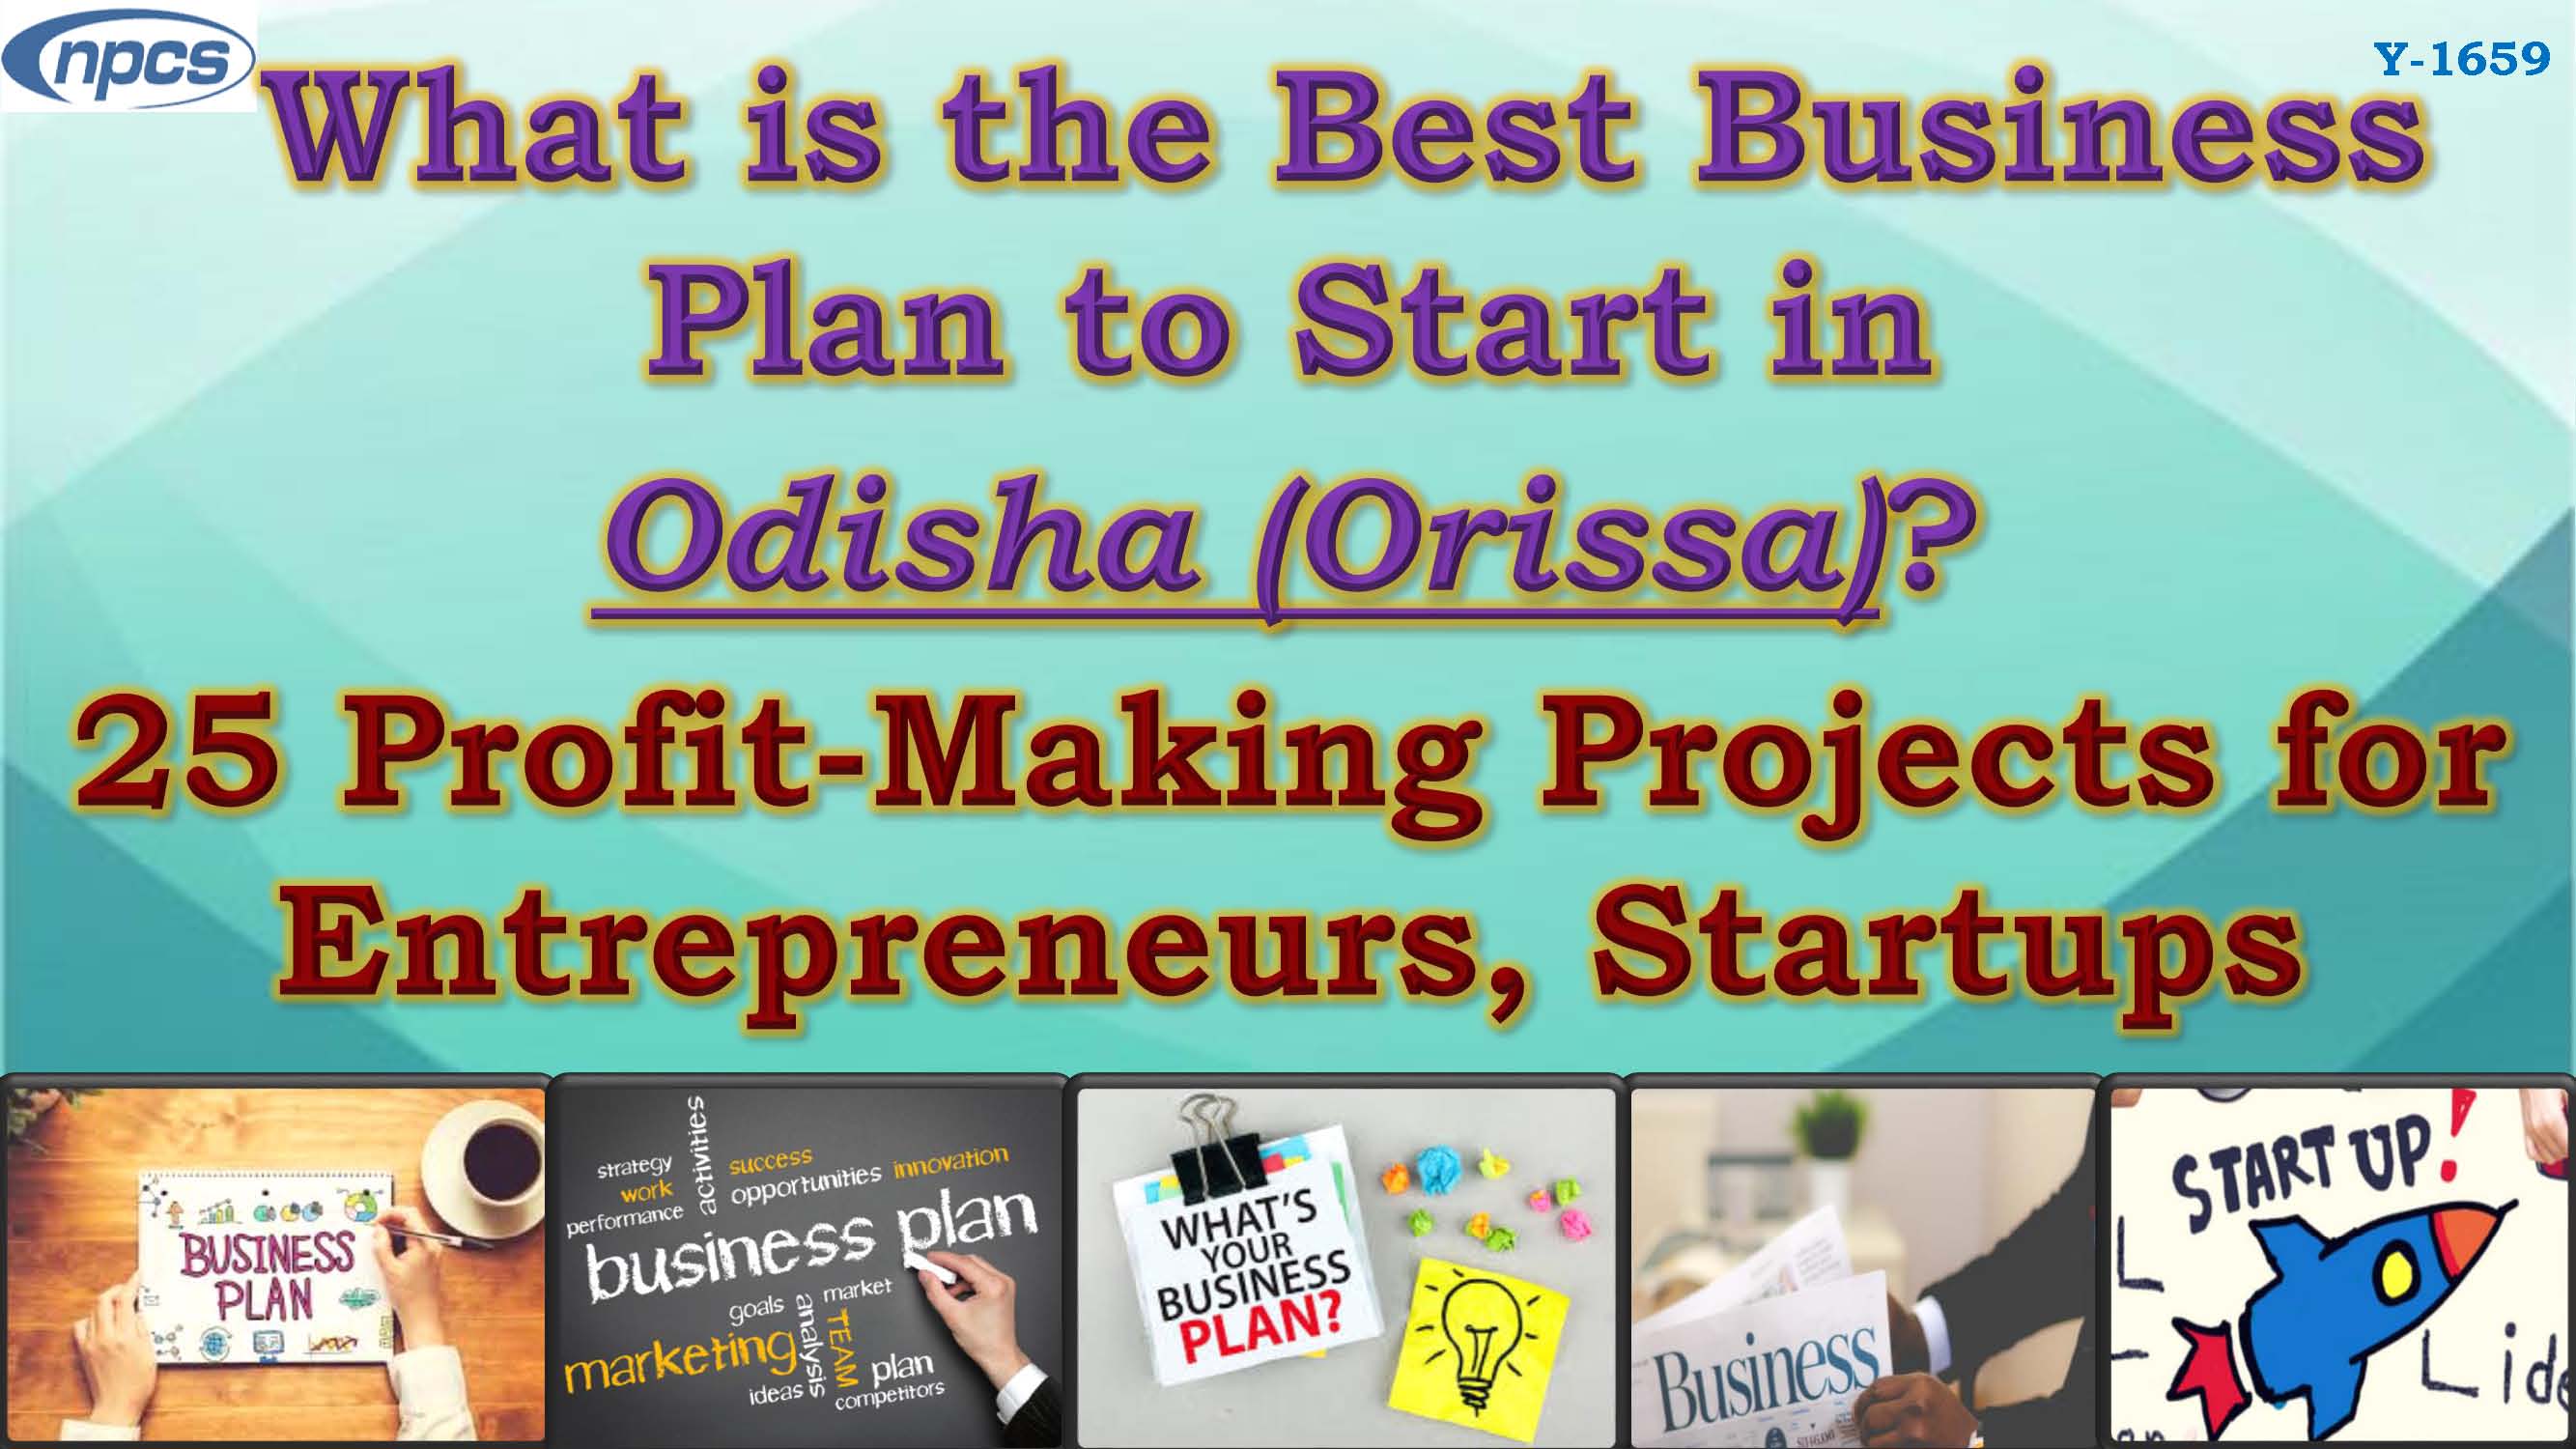 What is the Best Business Plan to Start in Odisha